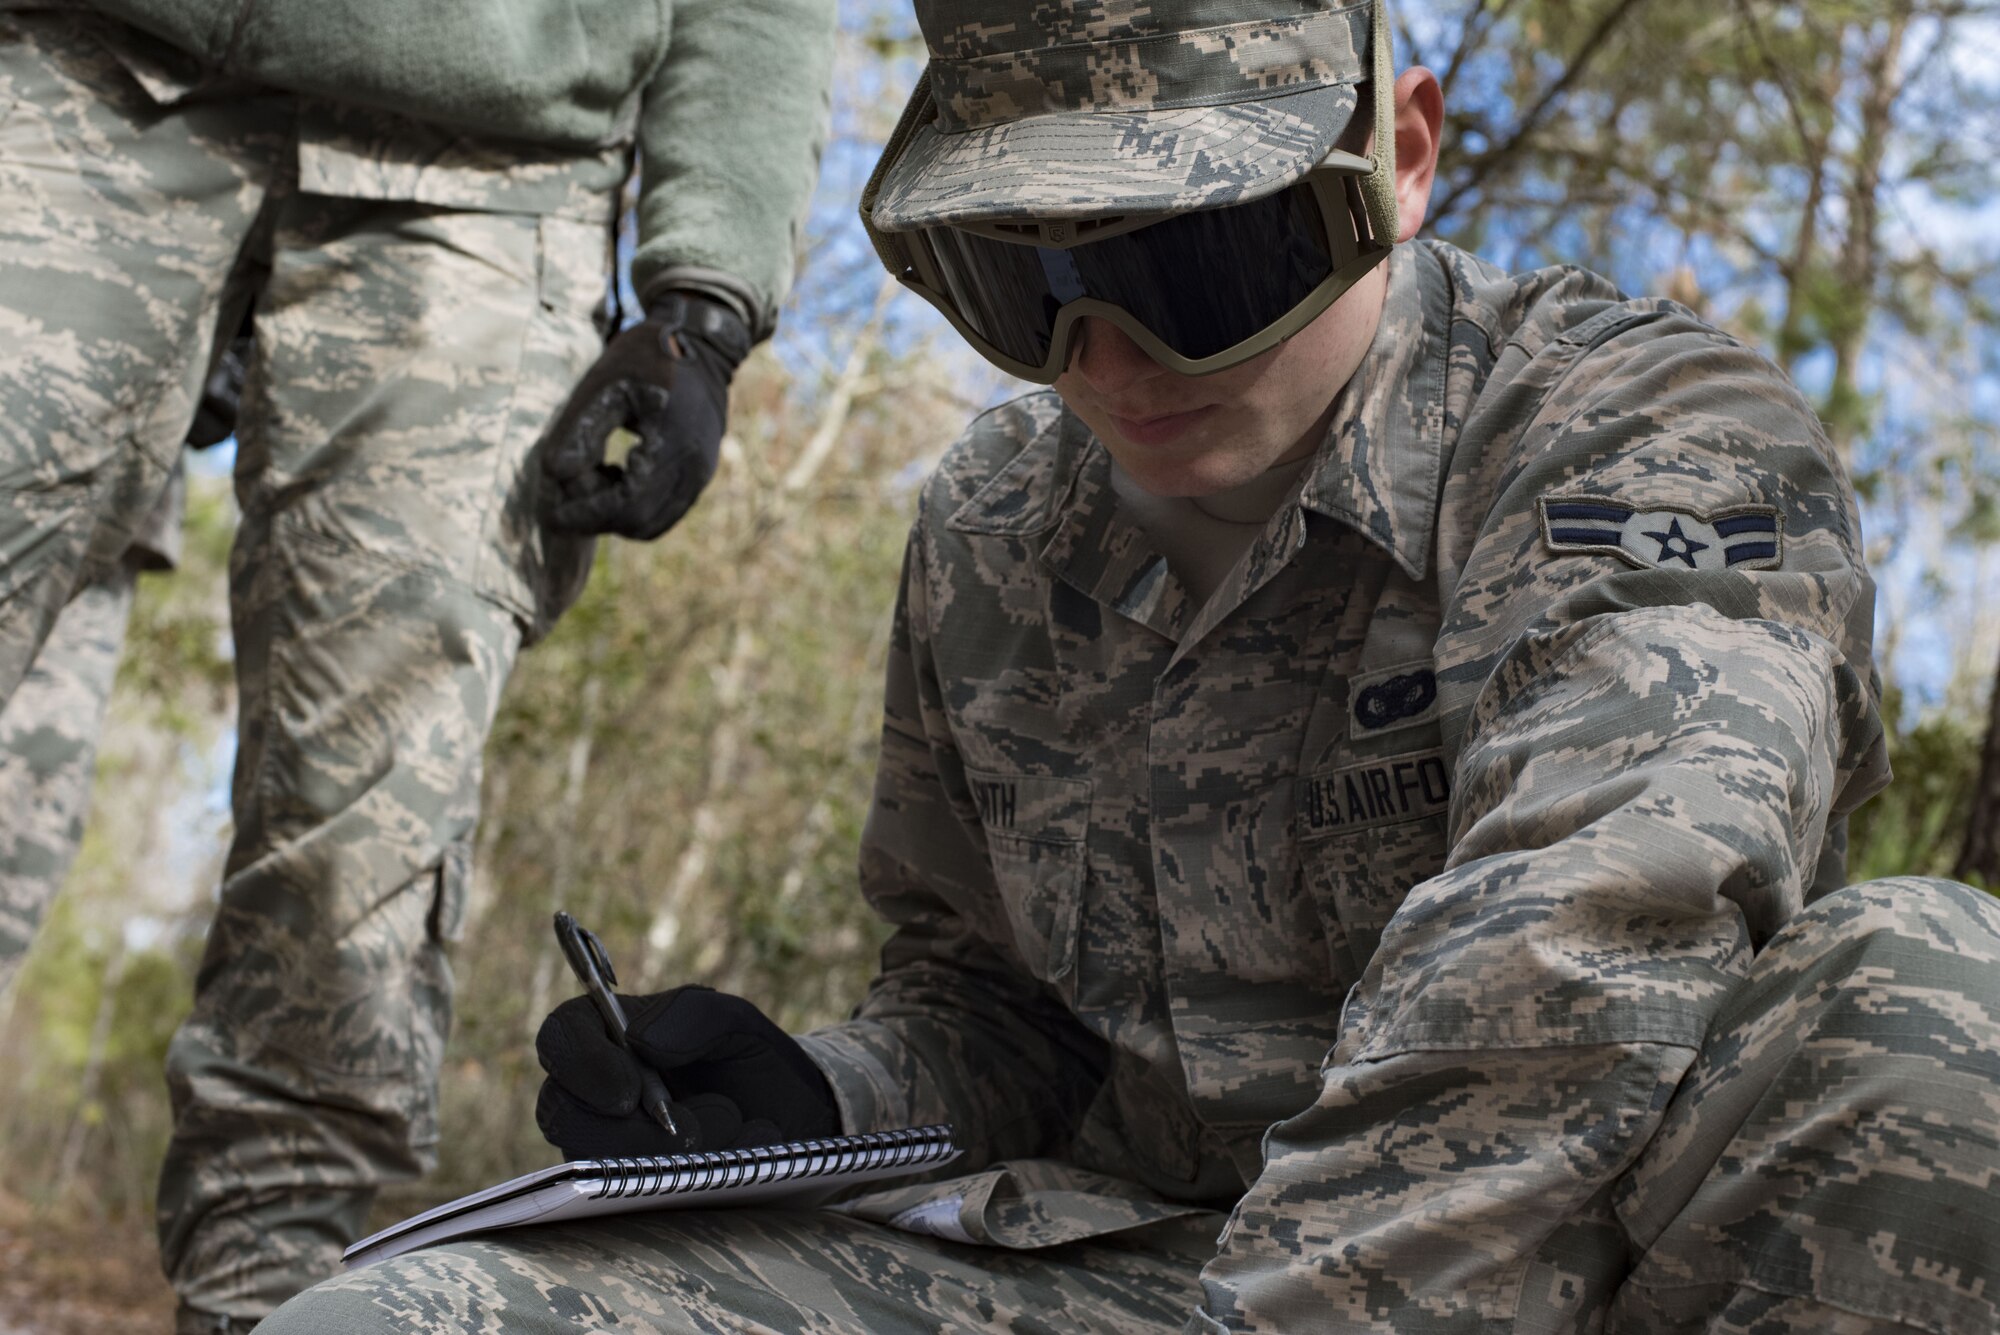 Airman 1st Class Kevin Smith, 824th Defense Squadron fireteam member, records a nine-line report to pass along information of a simulated improvised explosive device during training Jan. 24, 2018, at Moody Air Force Base, Ga. The 820th Base Defense Group defenders trained on how to detect IEDs and counter measures to take when one is found. IEDs have become one of the most common forms of attack in the Middle East since 2003. (U.S. Air Force photos by Staff Sgt. Eric Summers Jr.)